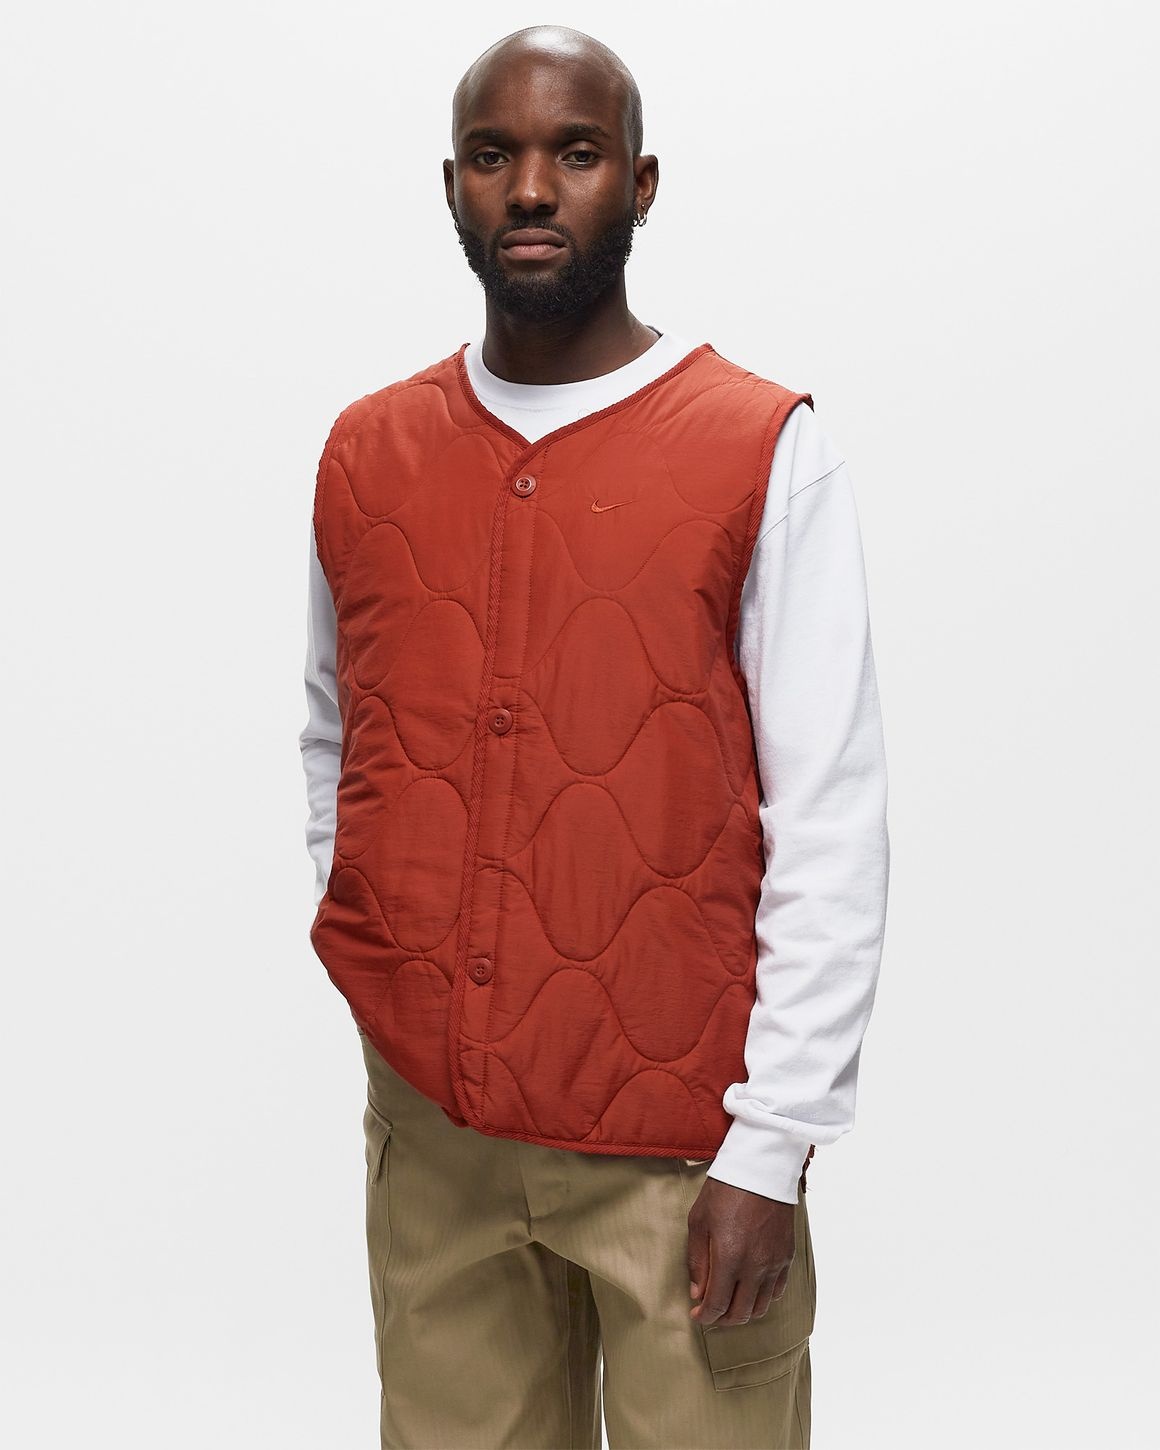 Nike Life Men's Woven Insulated Military Vest - 3